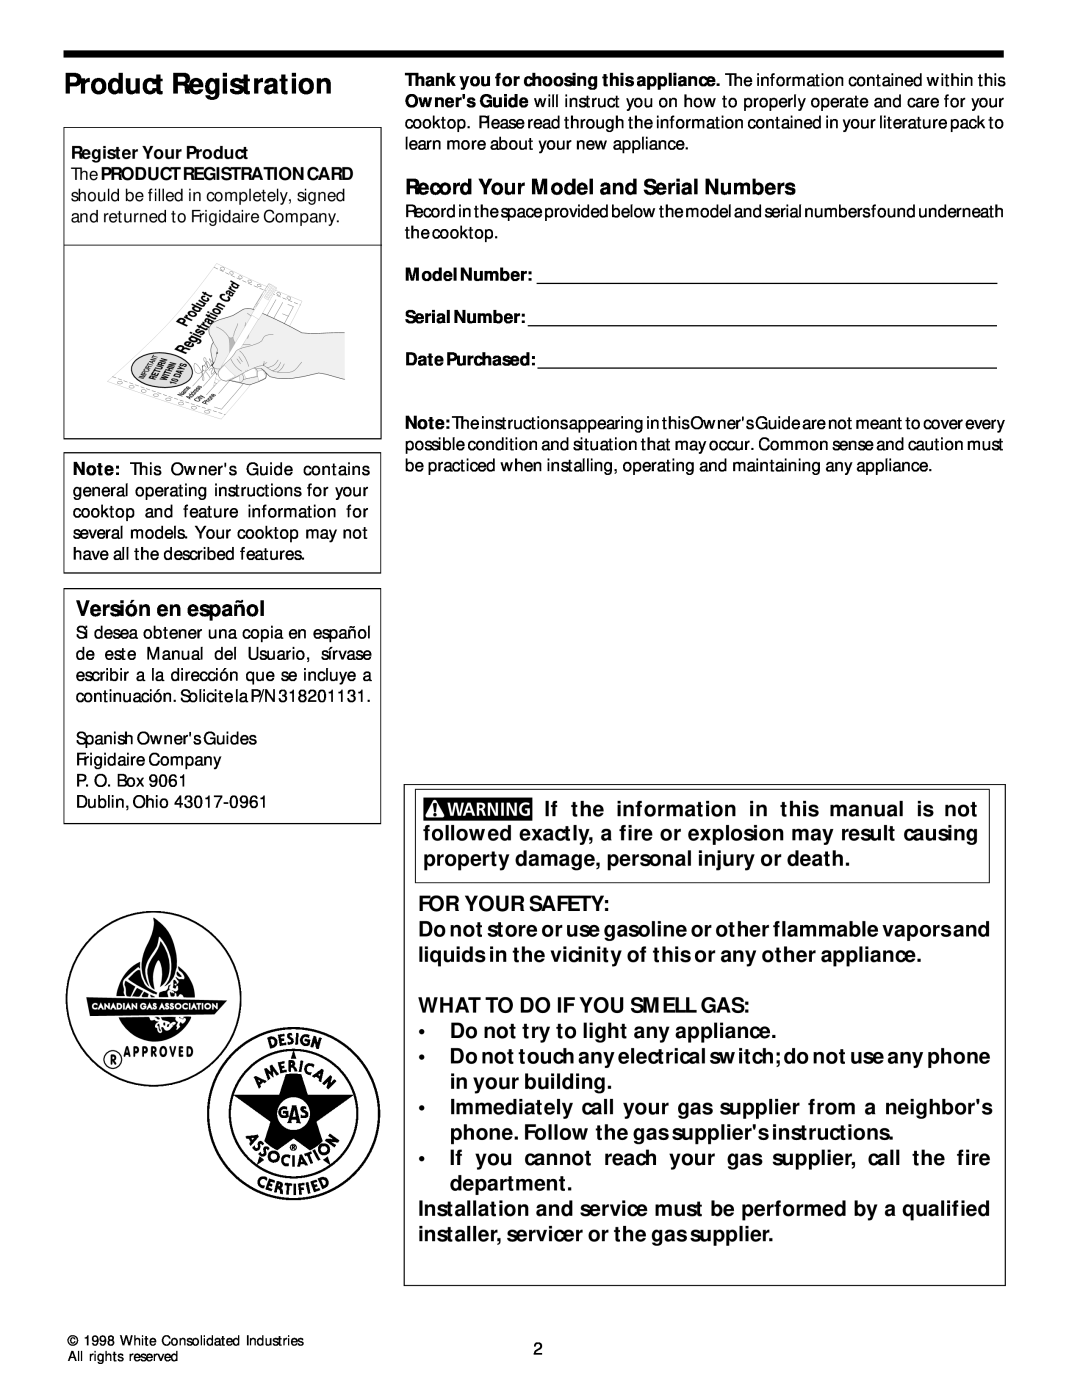 Frigidaire 318068129 important safety instructions Product Registration 